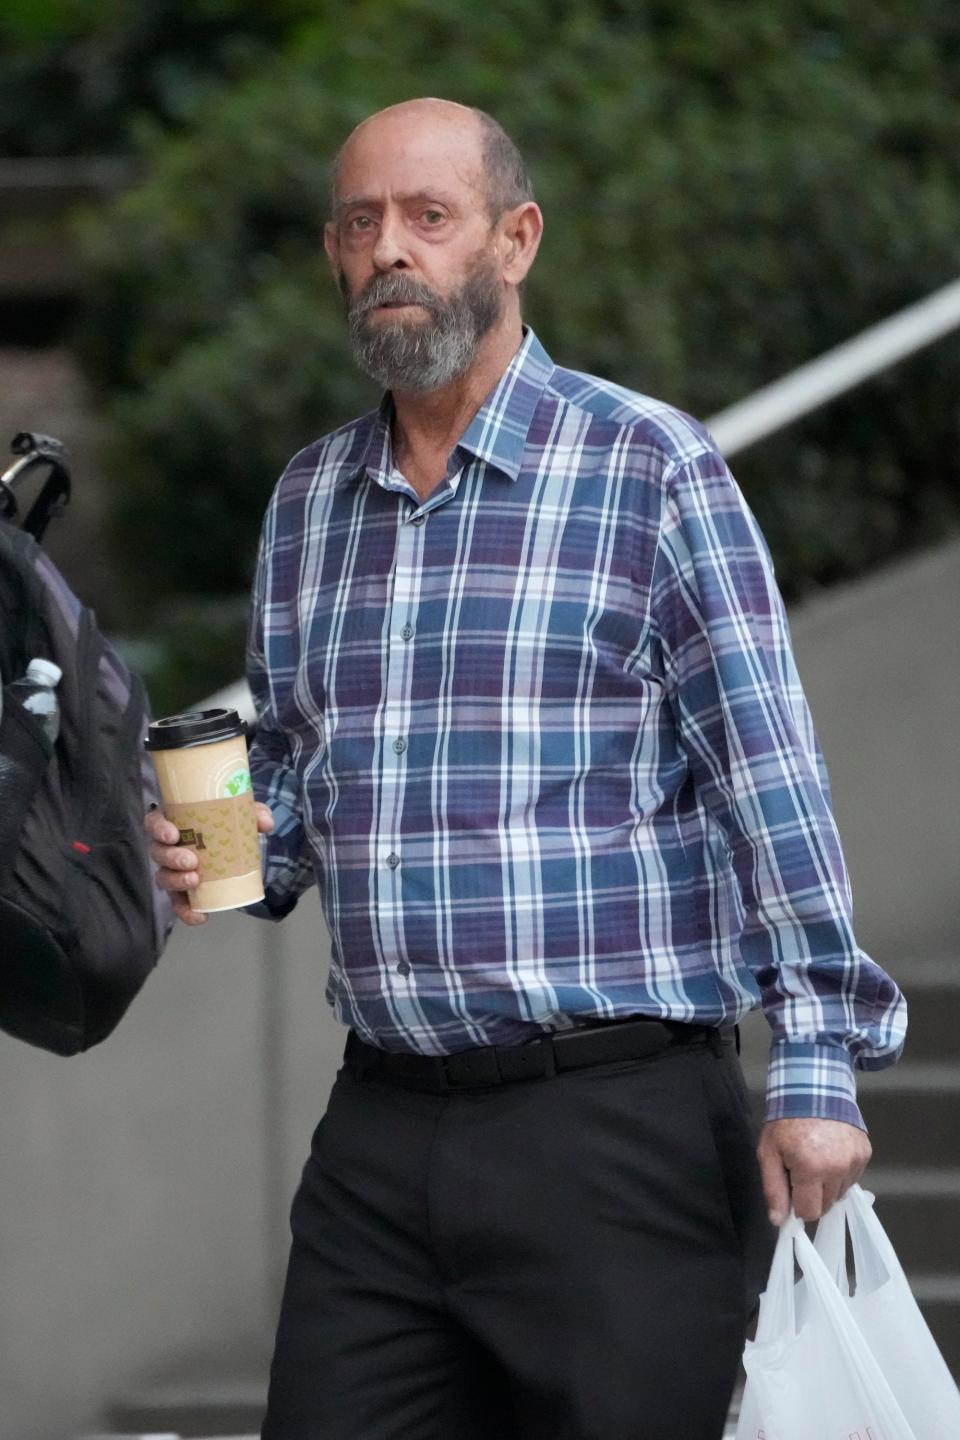 Conception Captain Jerry Boylan arrives in federal court in Los Angeles on Wednesday, Oct. 25, 2023. Federal prosecutors are seeking justice for 34 people killed in a fire aboard a scuba dive boat called the Conception in 2019. The trial against Boylan began Tuesday with jury selection. Boylan has pleaded not guilty to one count of misconduct or neglect of a ship officer.